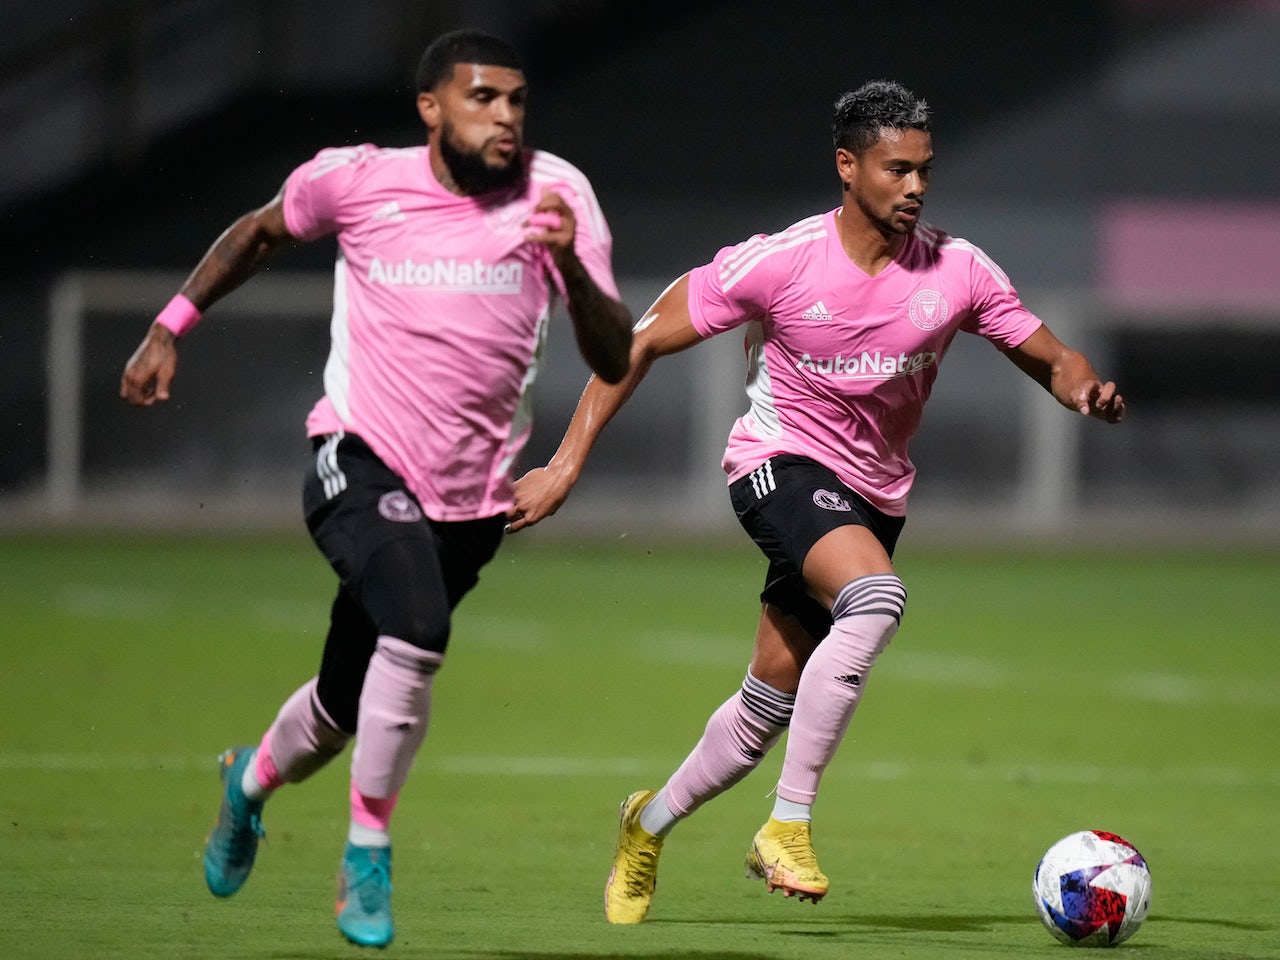 Inter Miami CF forward Ariel Lassiter (11) dribbles the ball up the field against the St. Louis CITY SC during the first period at Florida Blue Training Center on January 28, 2023